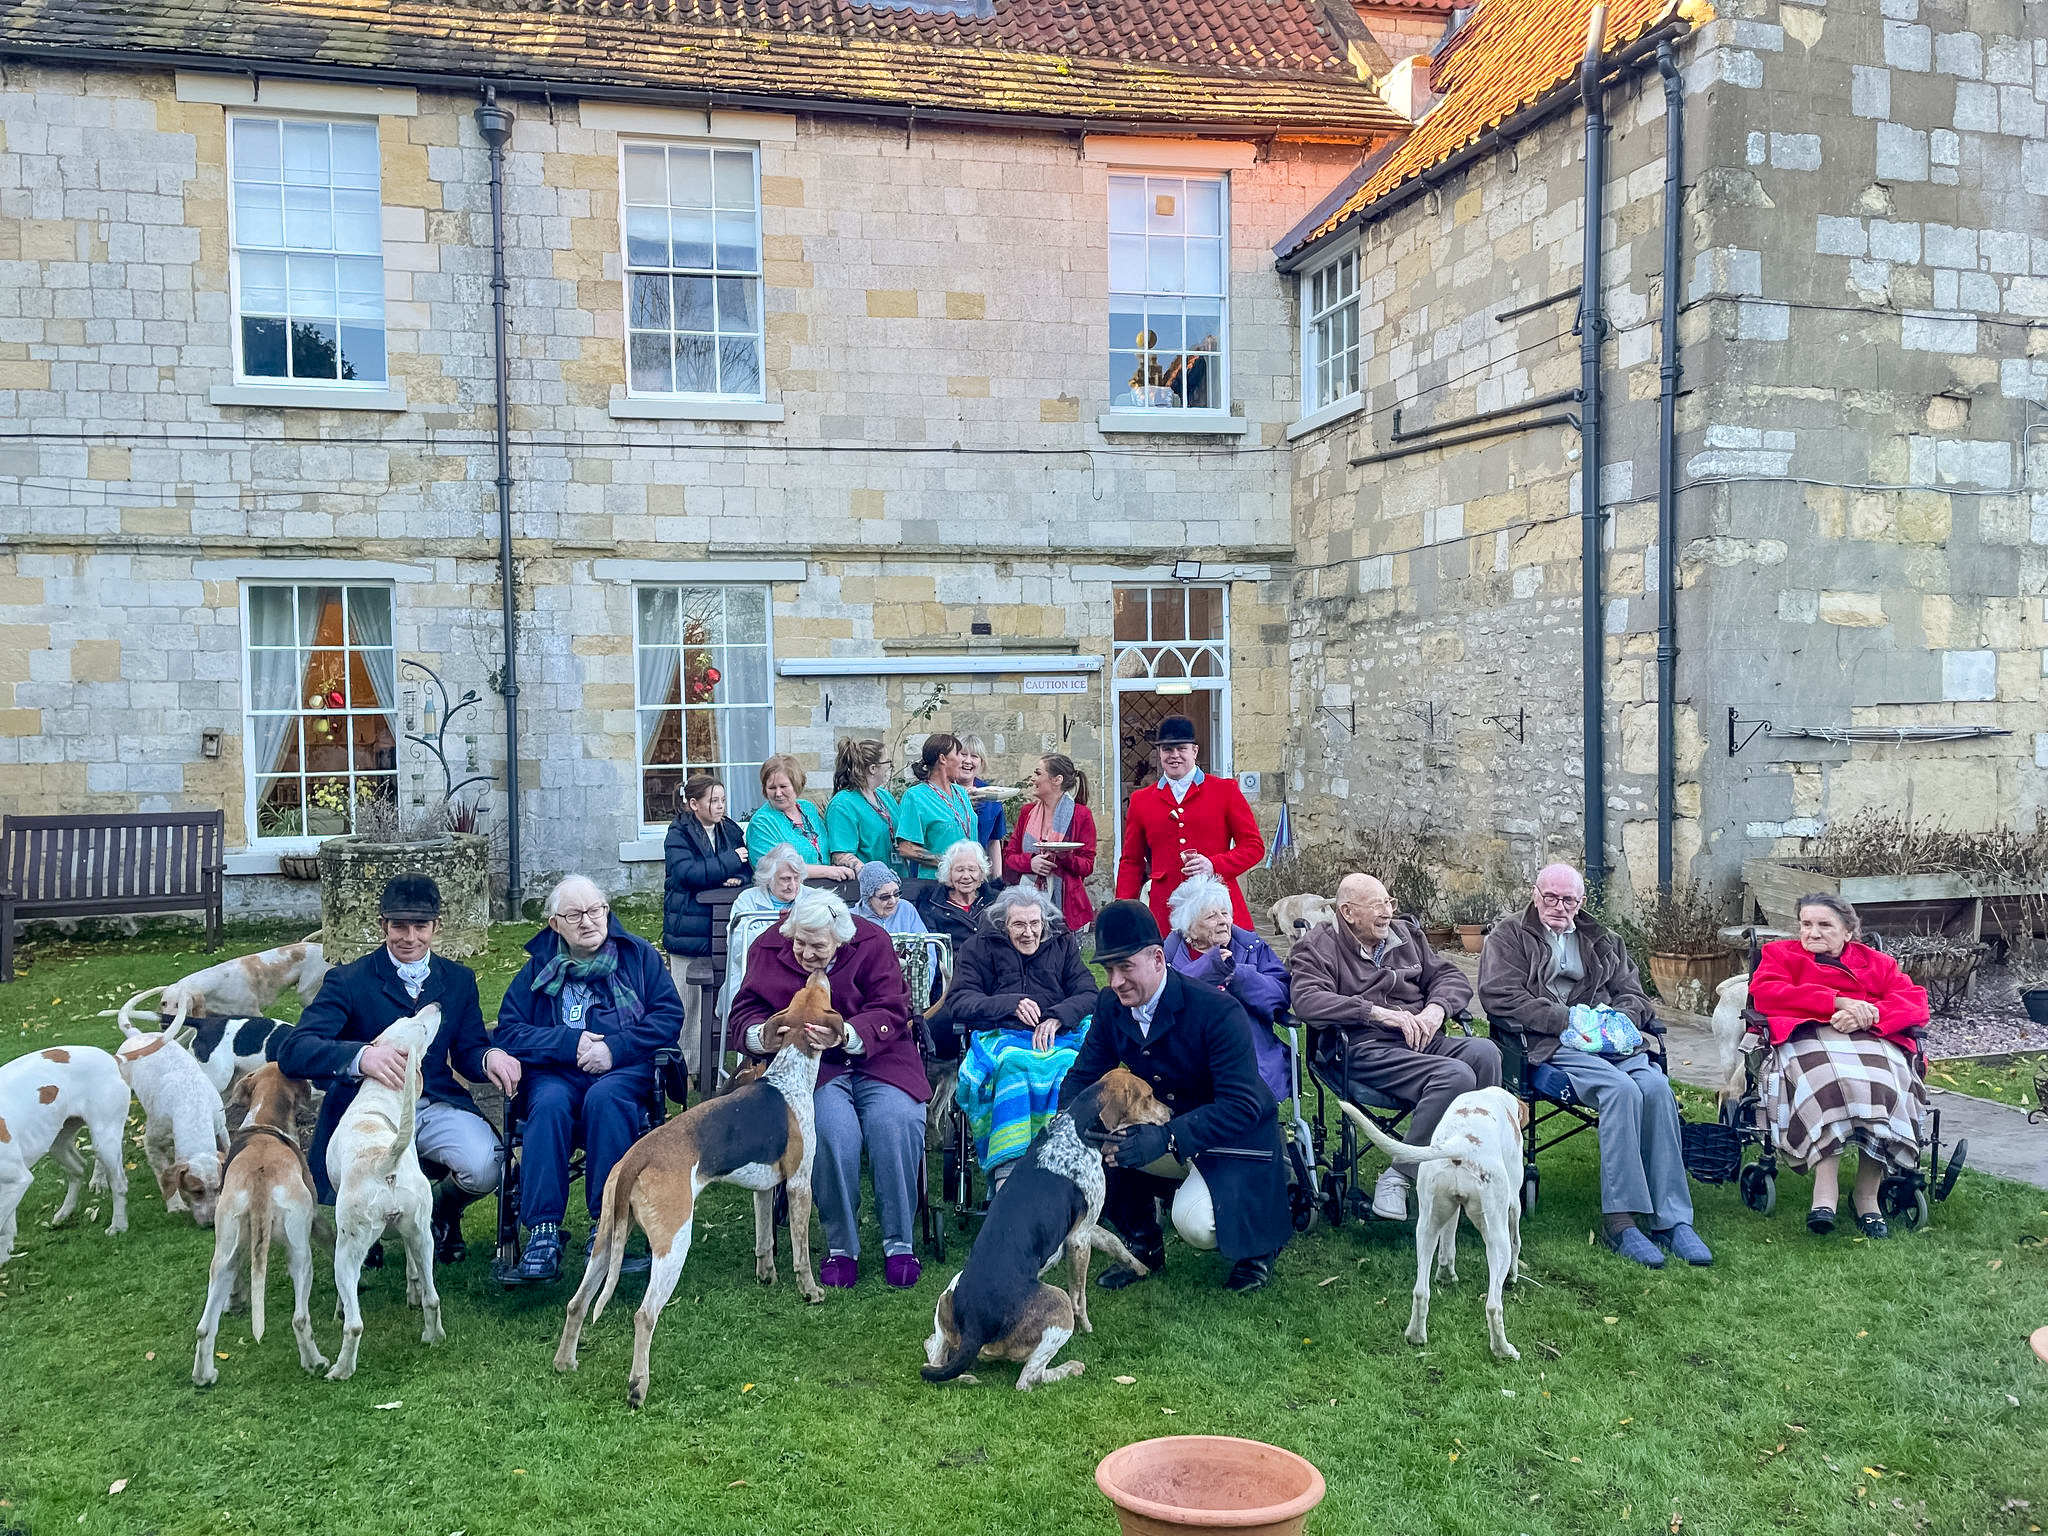 Staff and residents of The Abbey residential home in Old Malton, North Yorkshire, enjoying a visit from the hounds and huntsmen of the Middleton Hunt, in a tradition dating back over 30 years. Image: BHSA